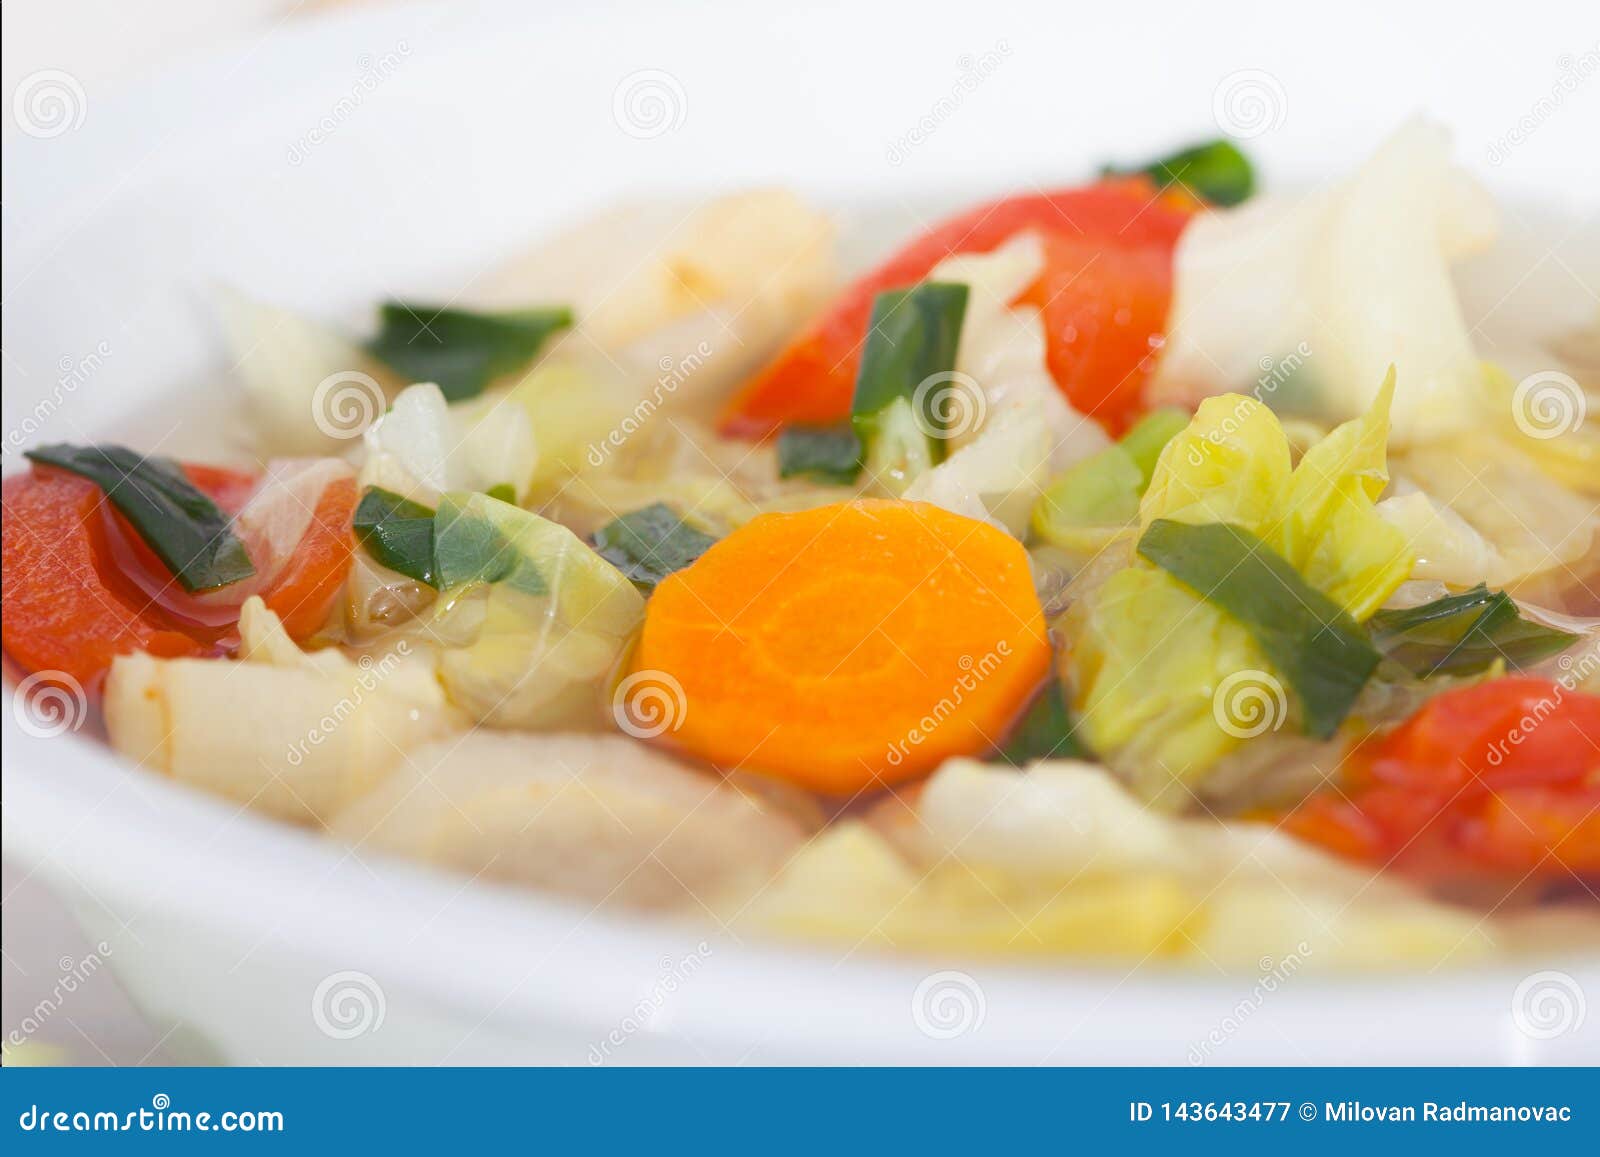 Fresh Homemade Vegetable Soup With Cabbage And Tomato ...